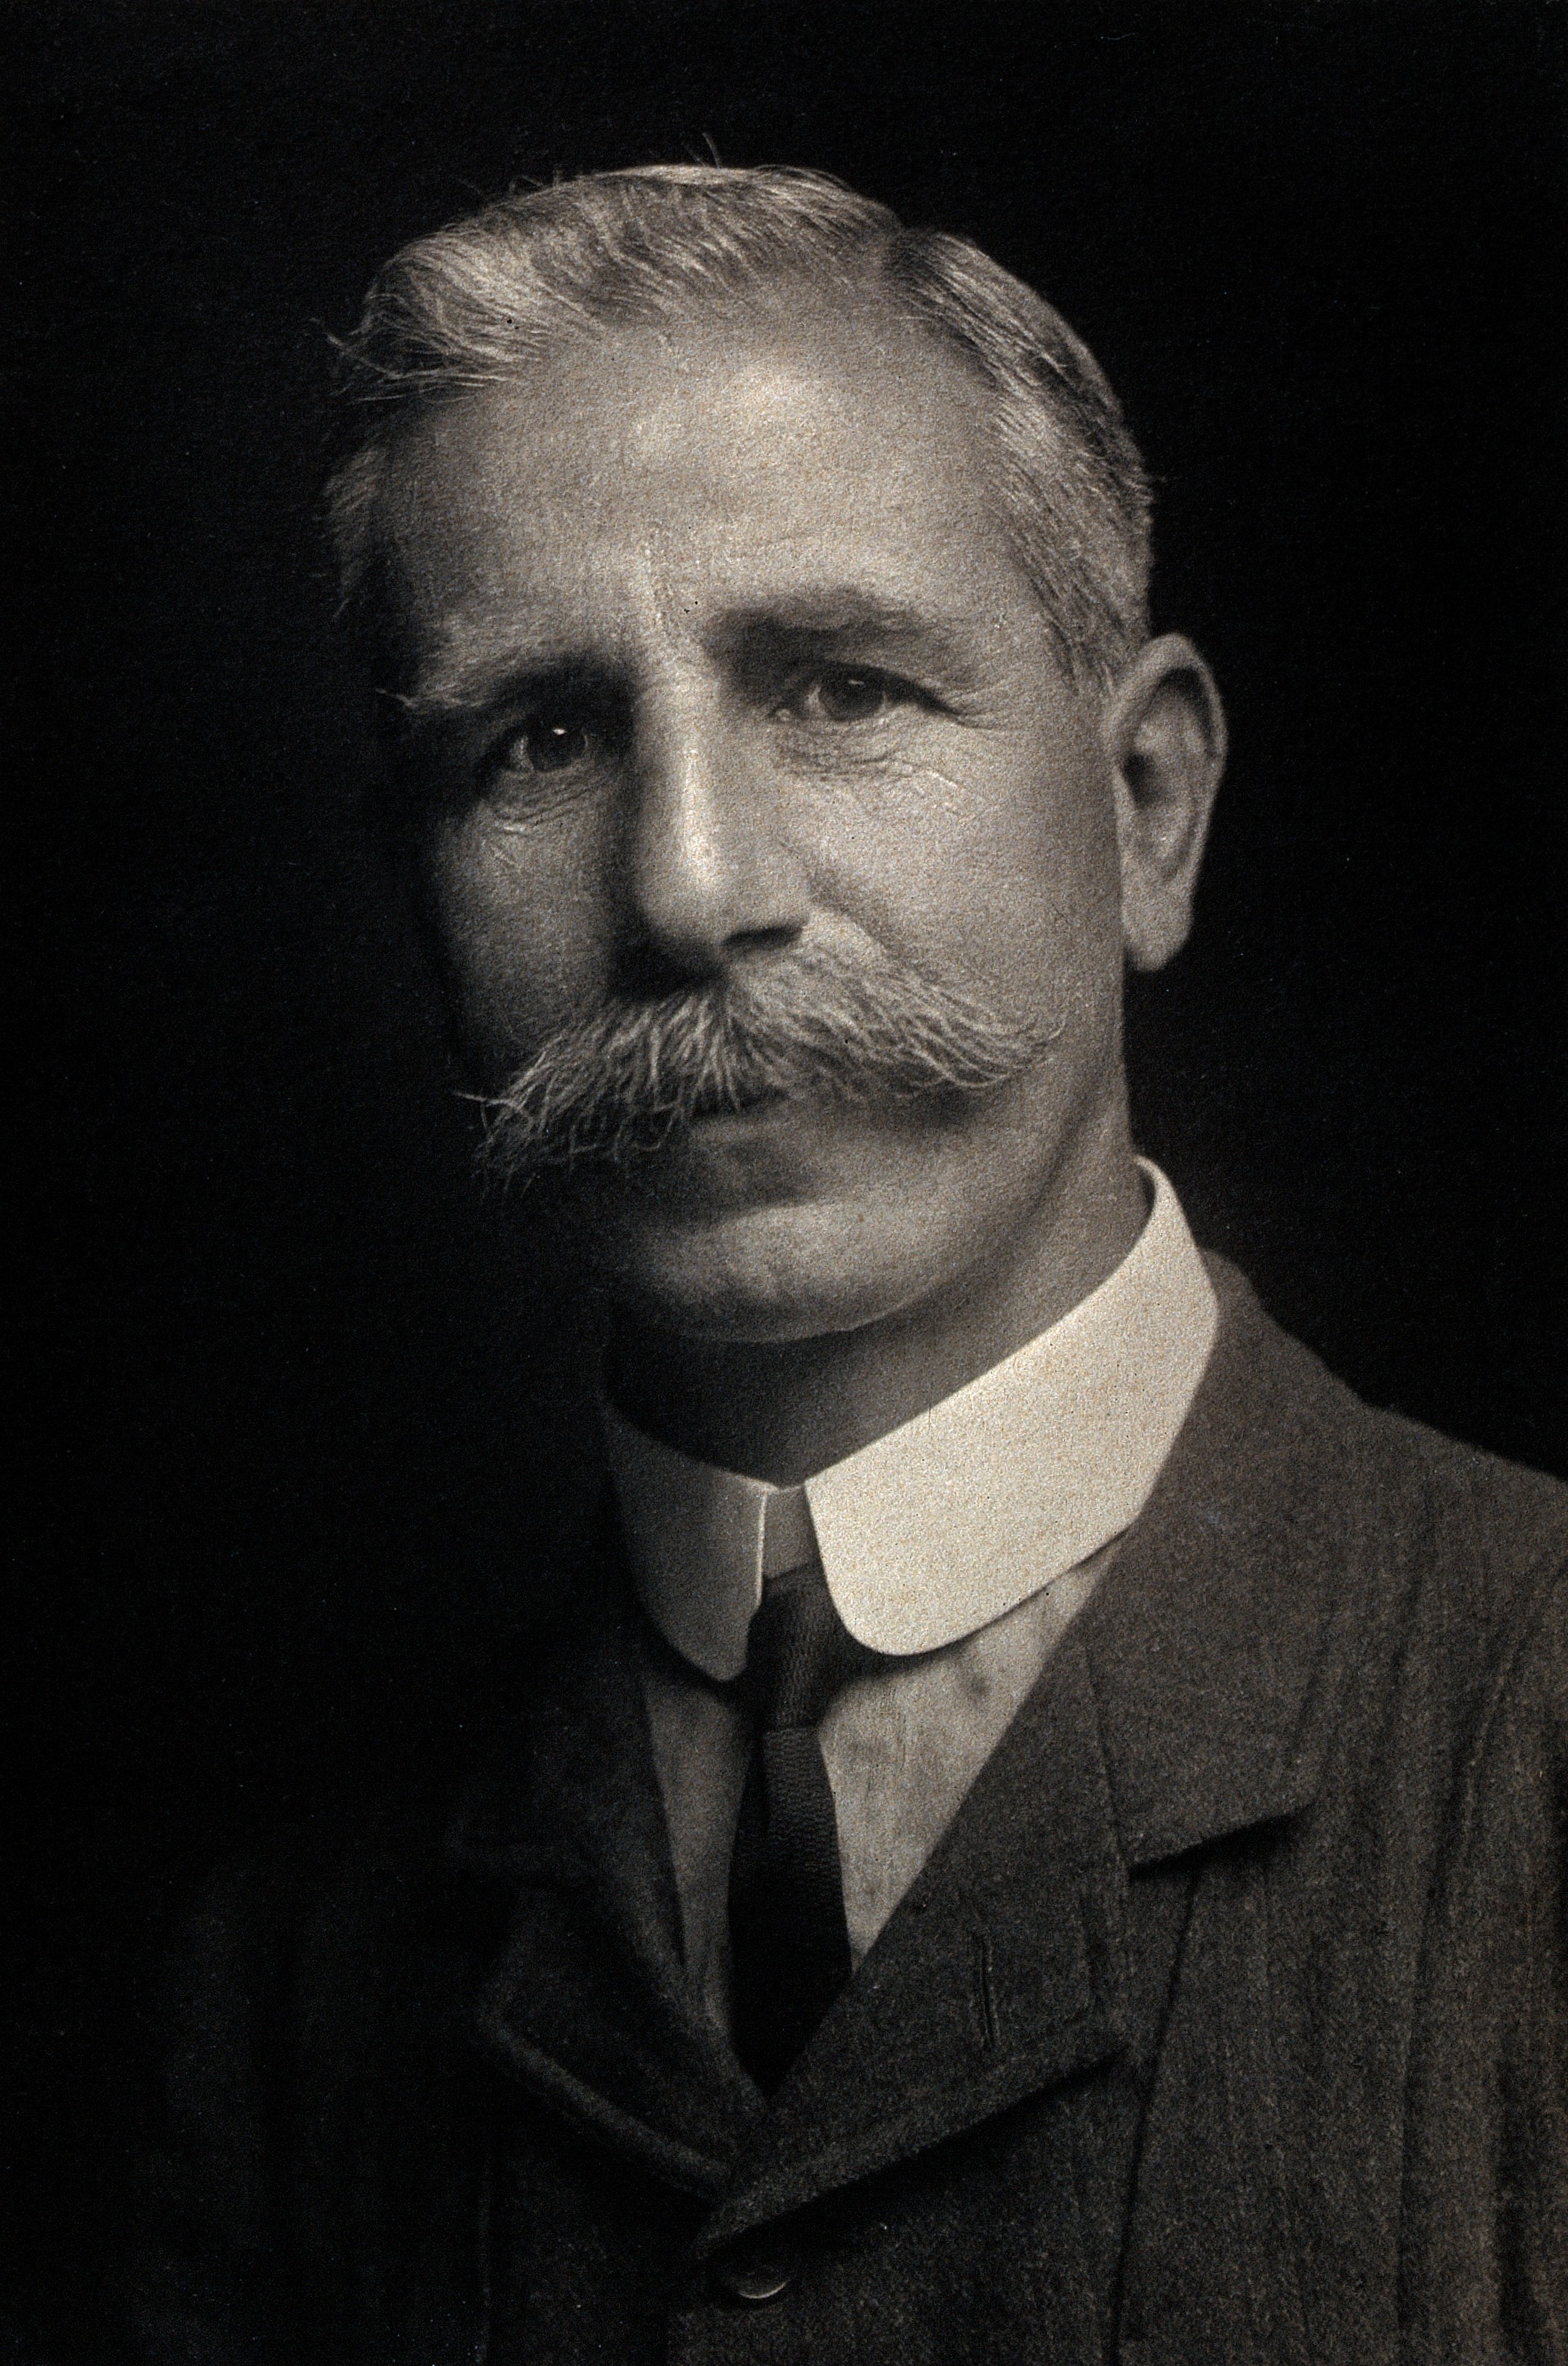 Francis Penny. Photograph by Hasted (?). Wellcome V0027002